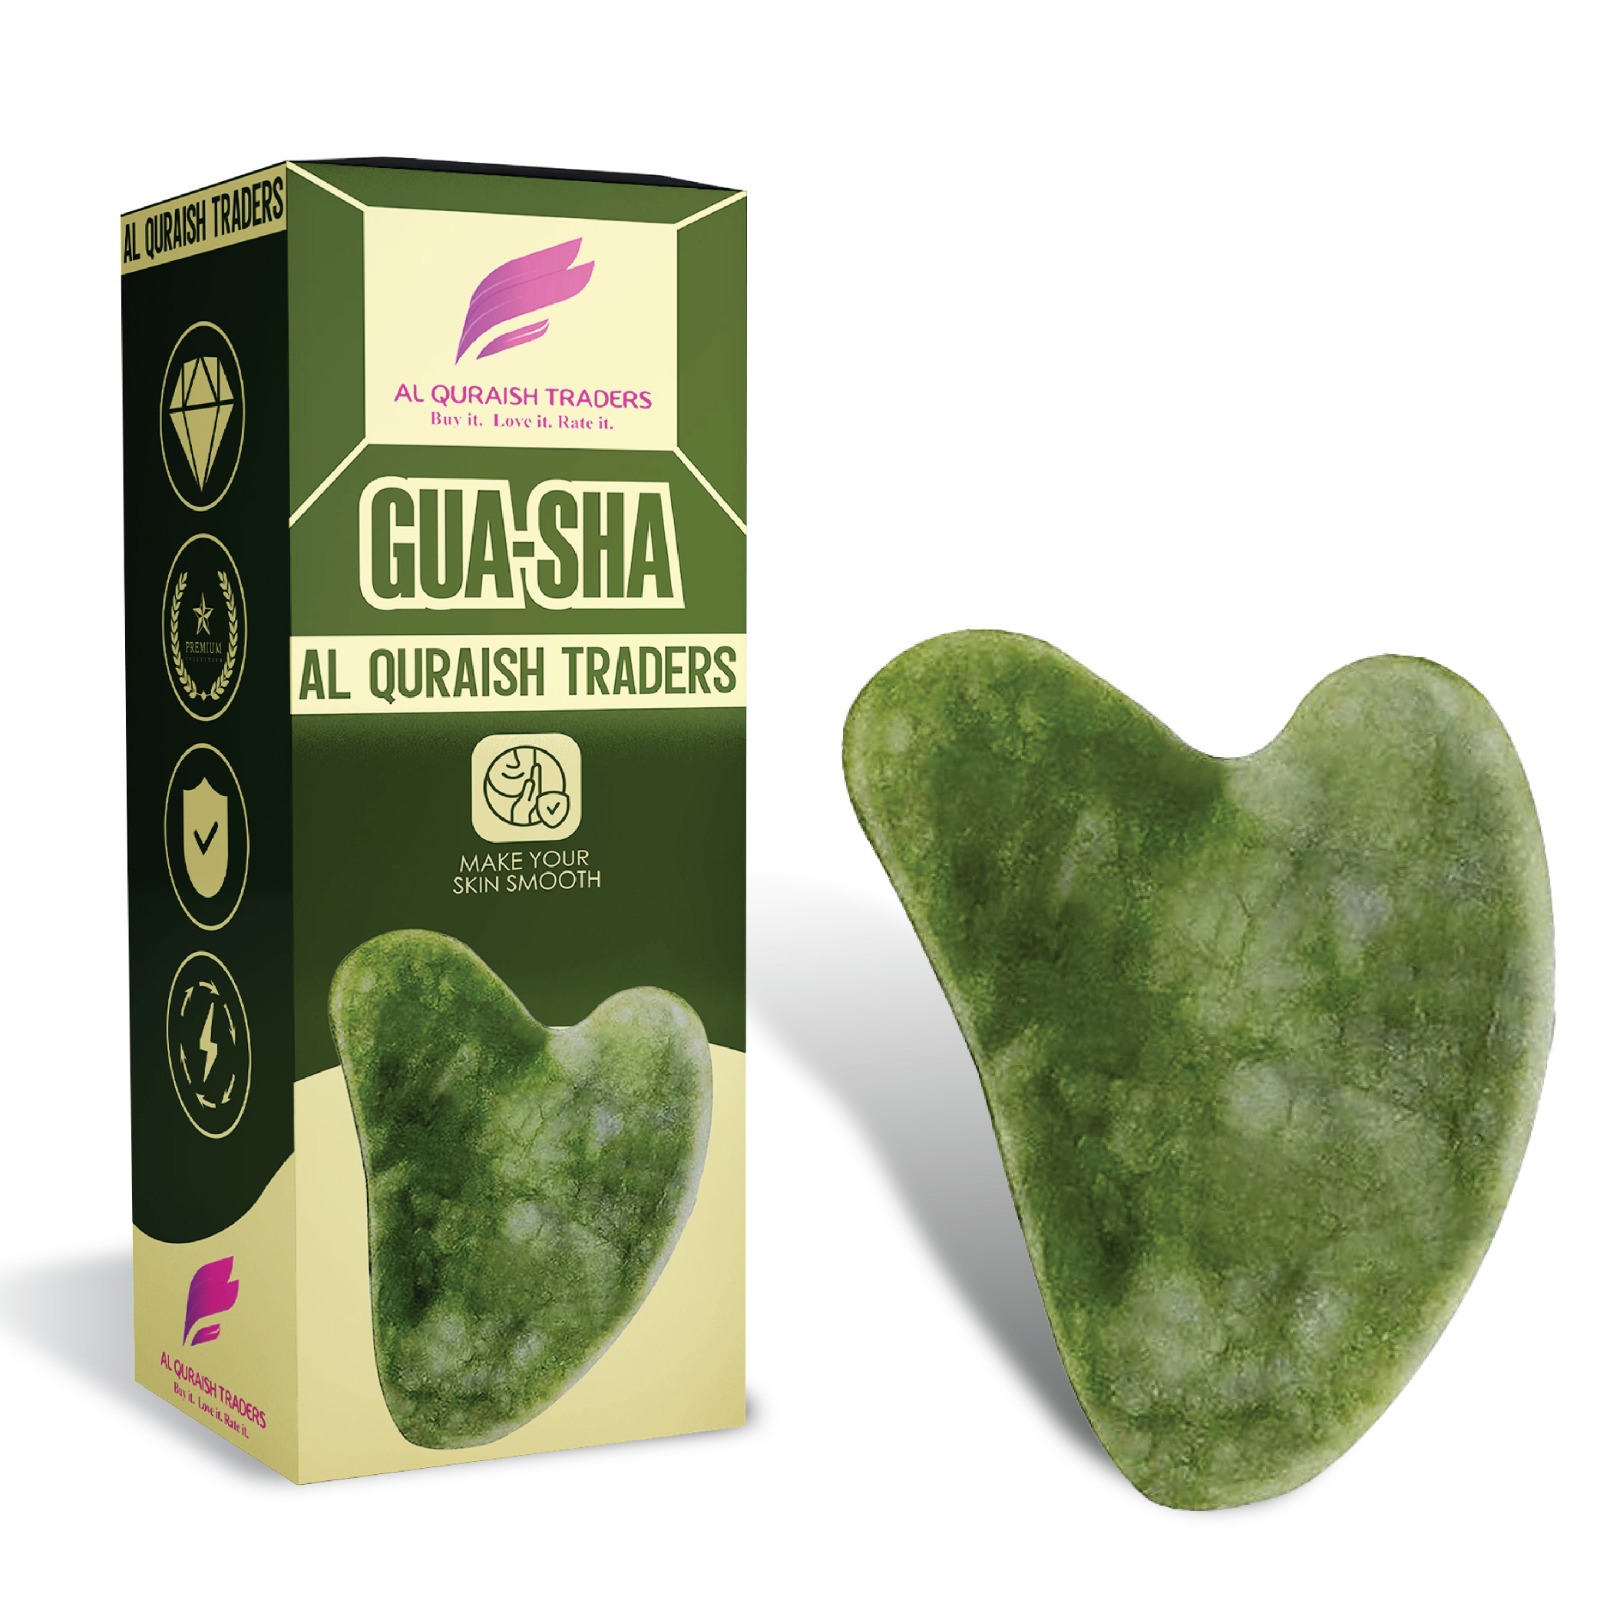 Al Quraish Traders - Anti-aging Natural Stone Jade Gua Sha Heart Shape Scrapper For Face Massage Slimming Facial Relaxation And Face Lift